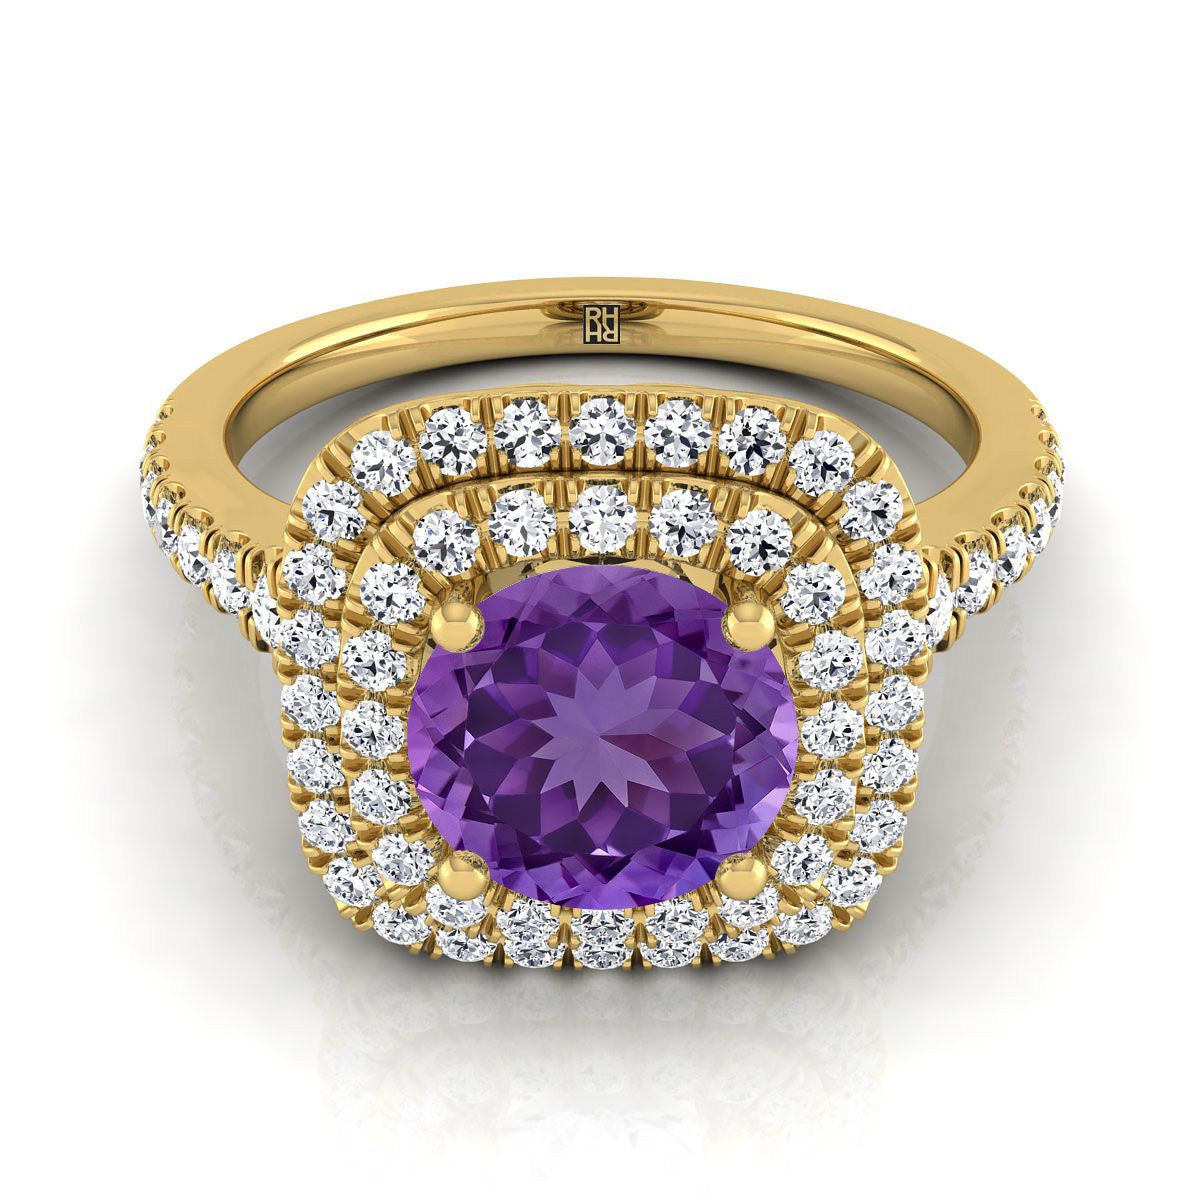 18K Yellow Gold Round Brilliant Amethyst Double Halo with Scalloped Pavé Diamond Engagement Ring -1/2ctw